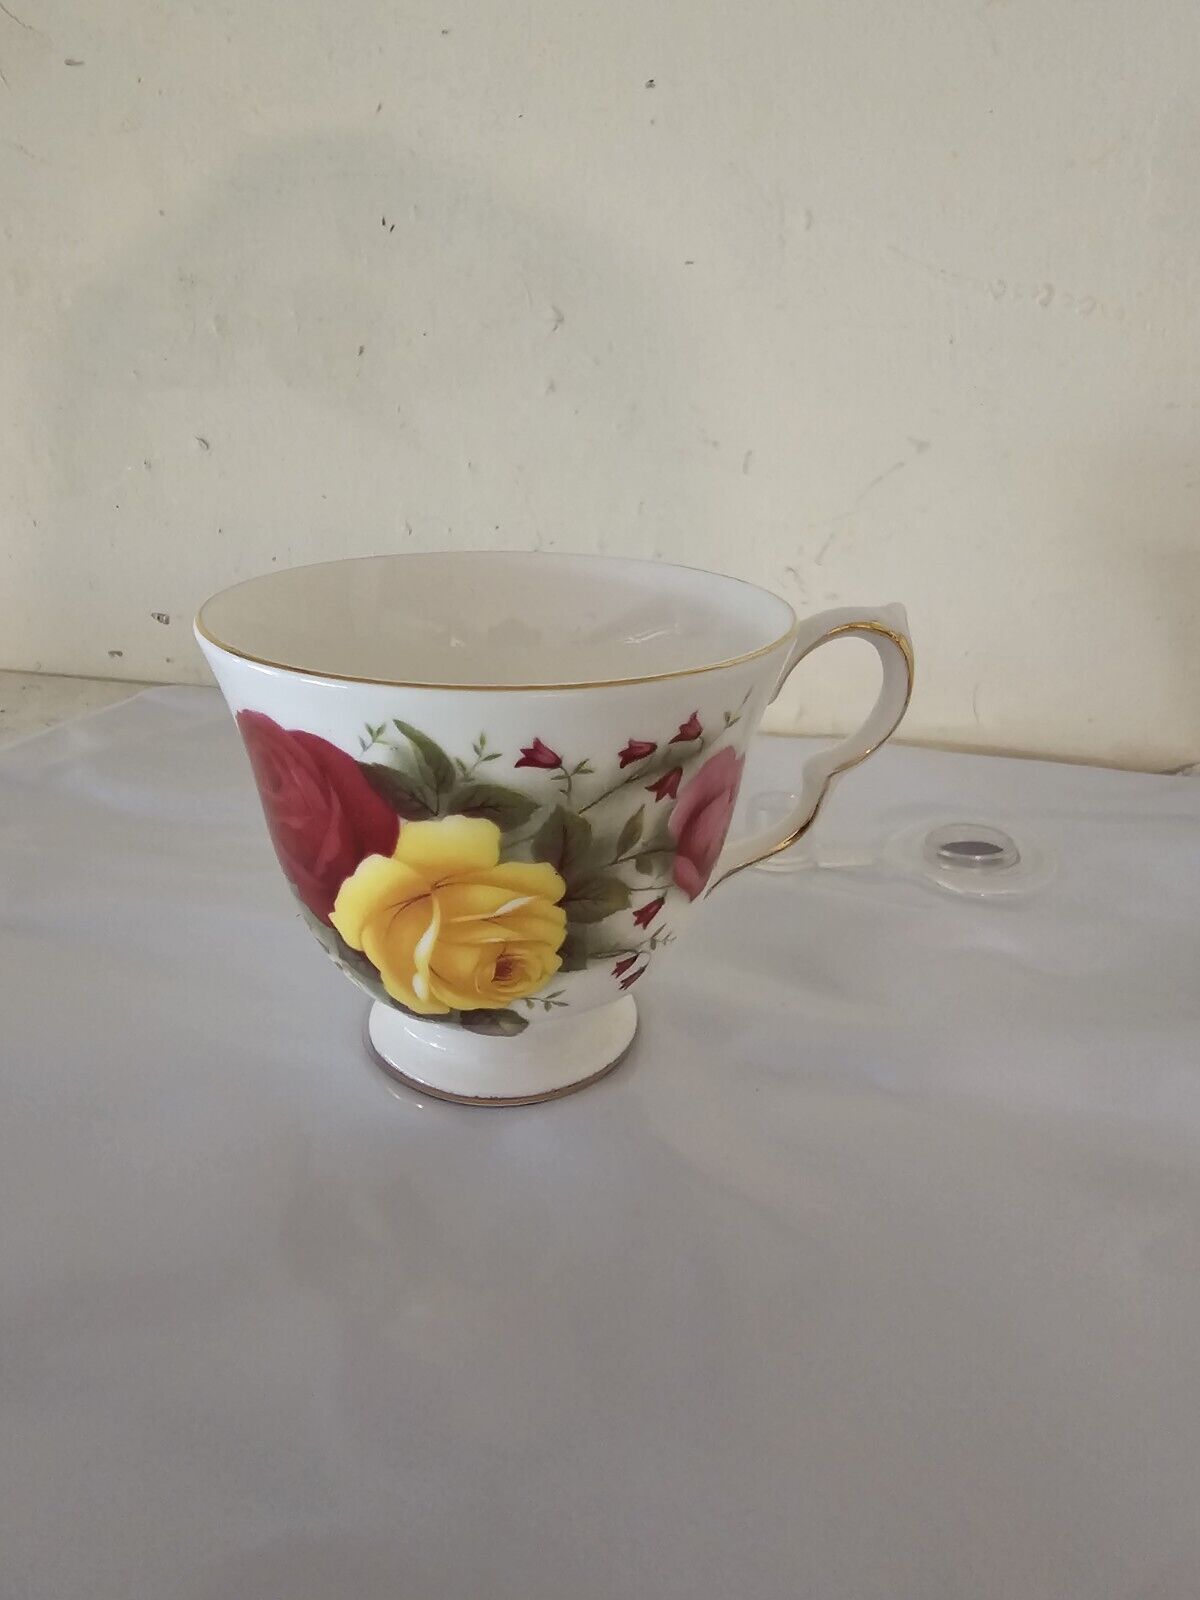 Vintage Queen Anne Bone China Tea Cup Saucer Red Yellow Roses Gold Trim 